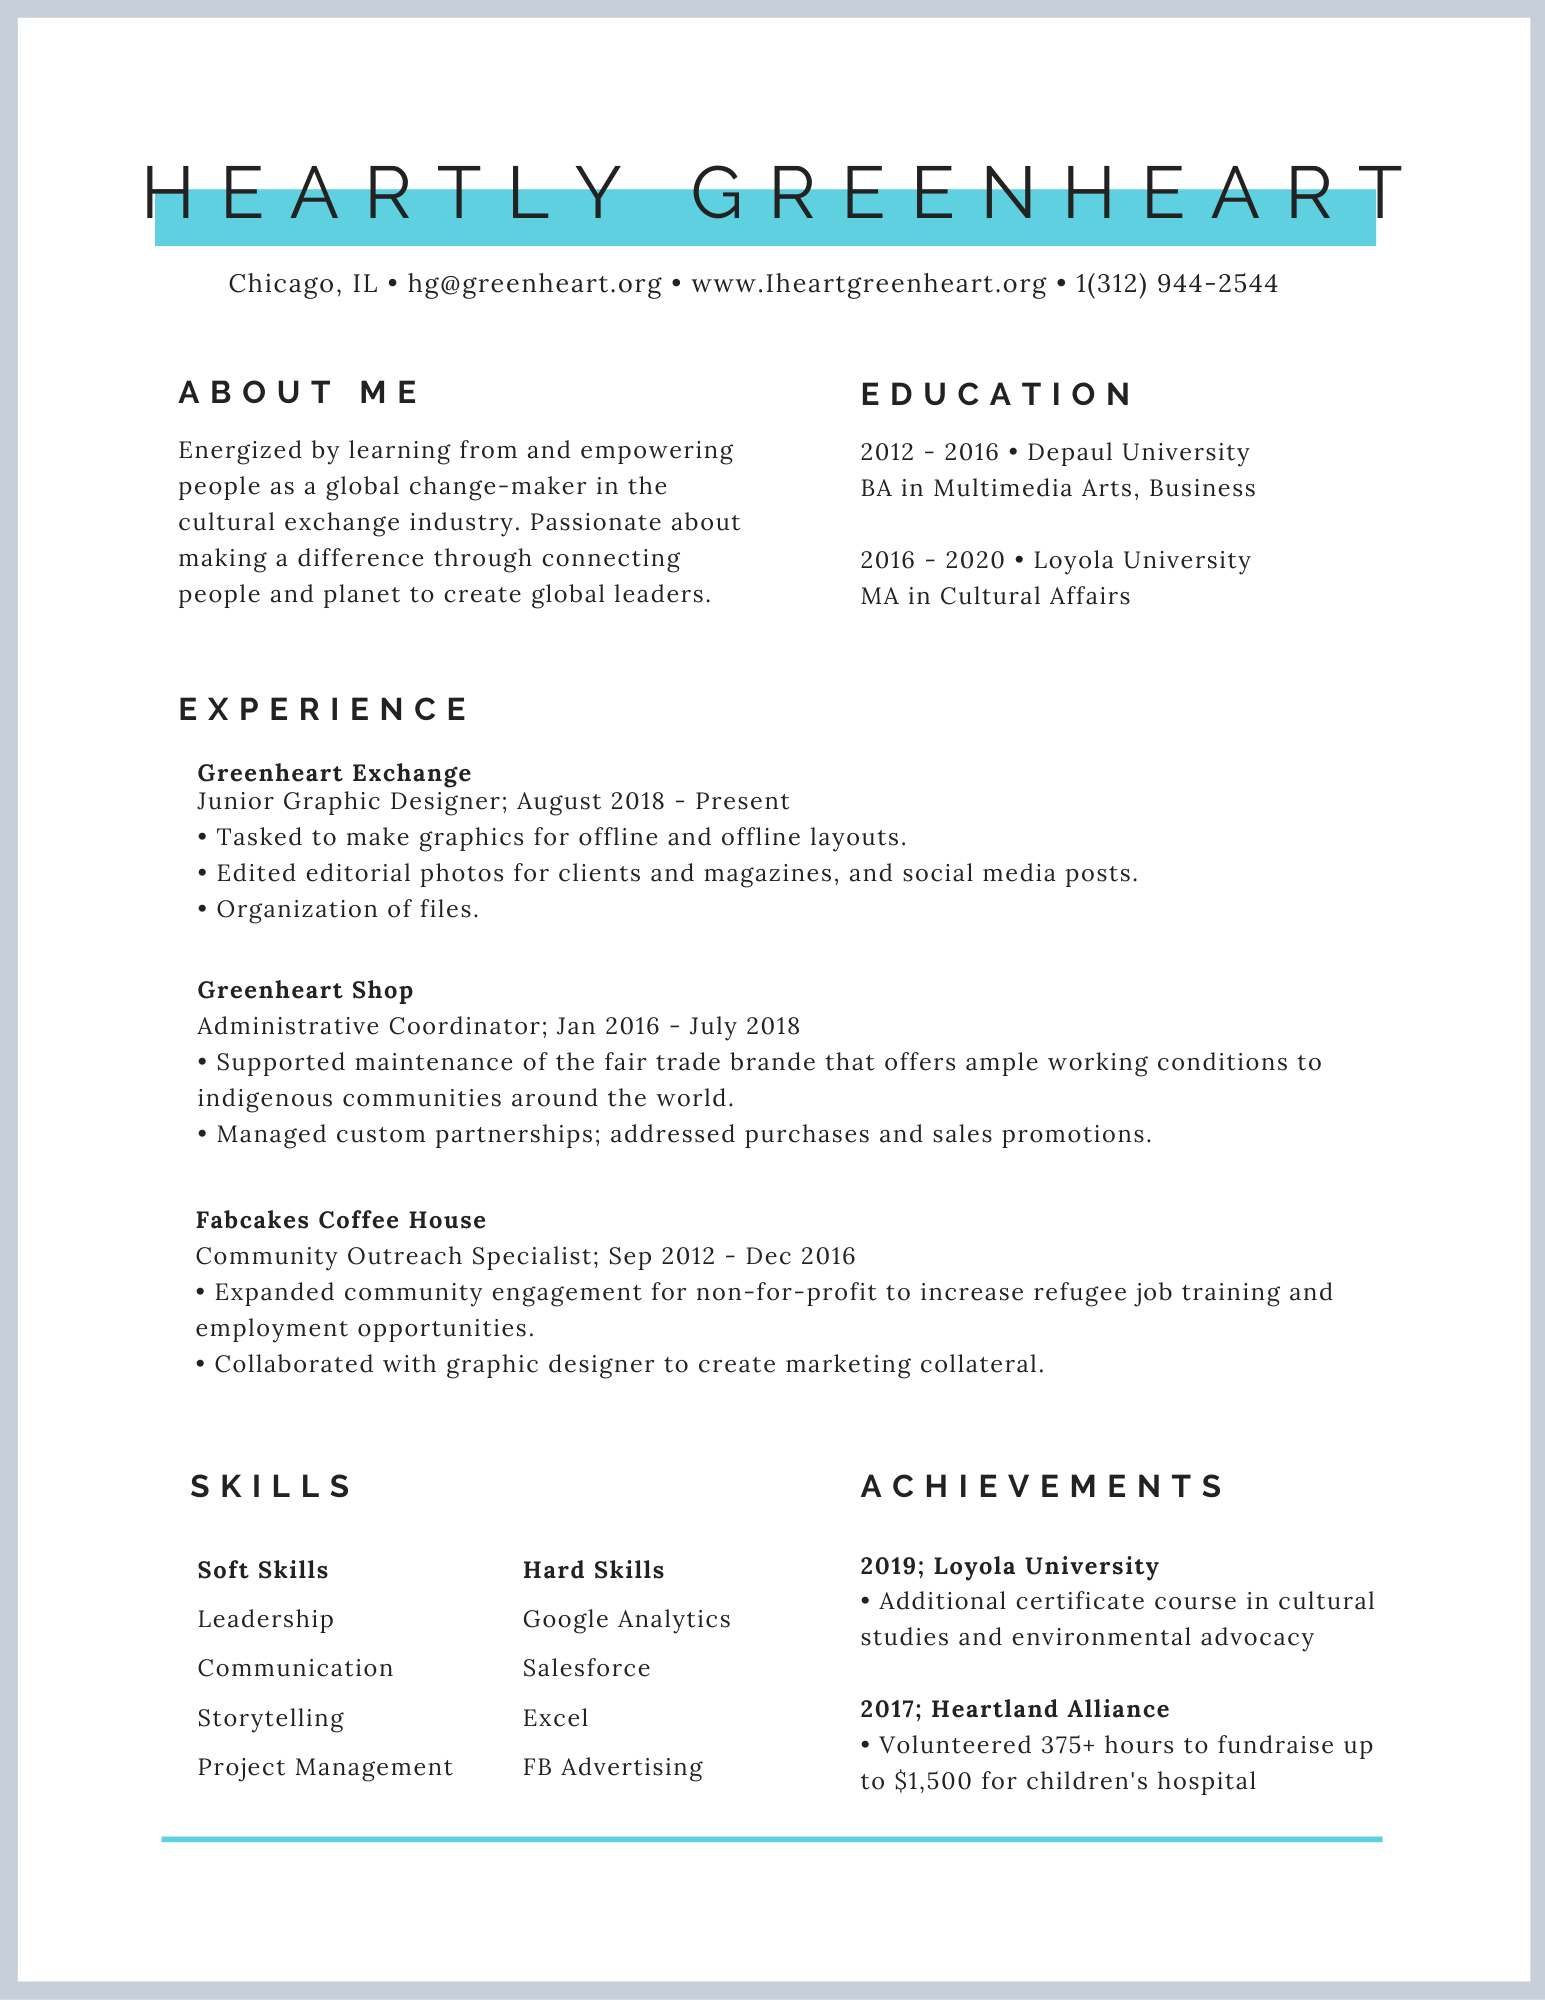 A Greenheart Guide To Your Resume Greenheart International